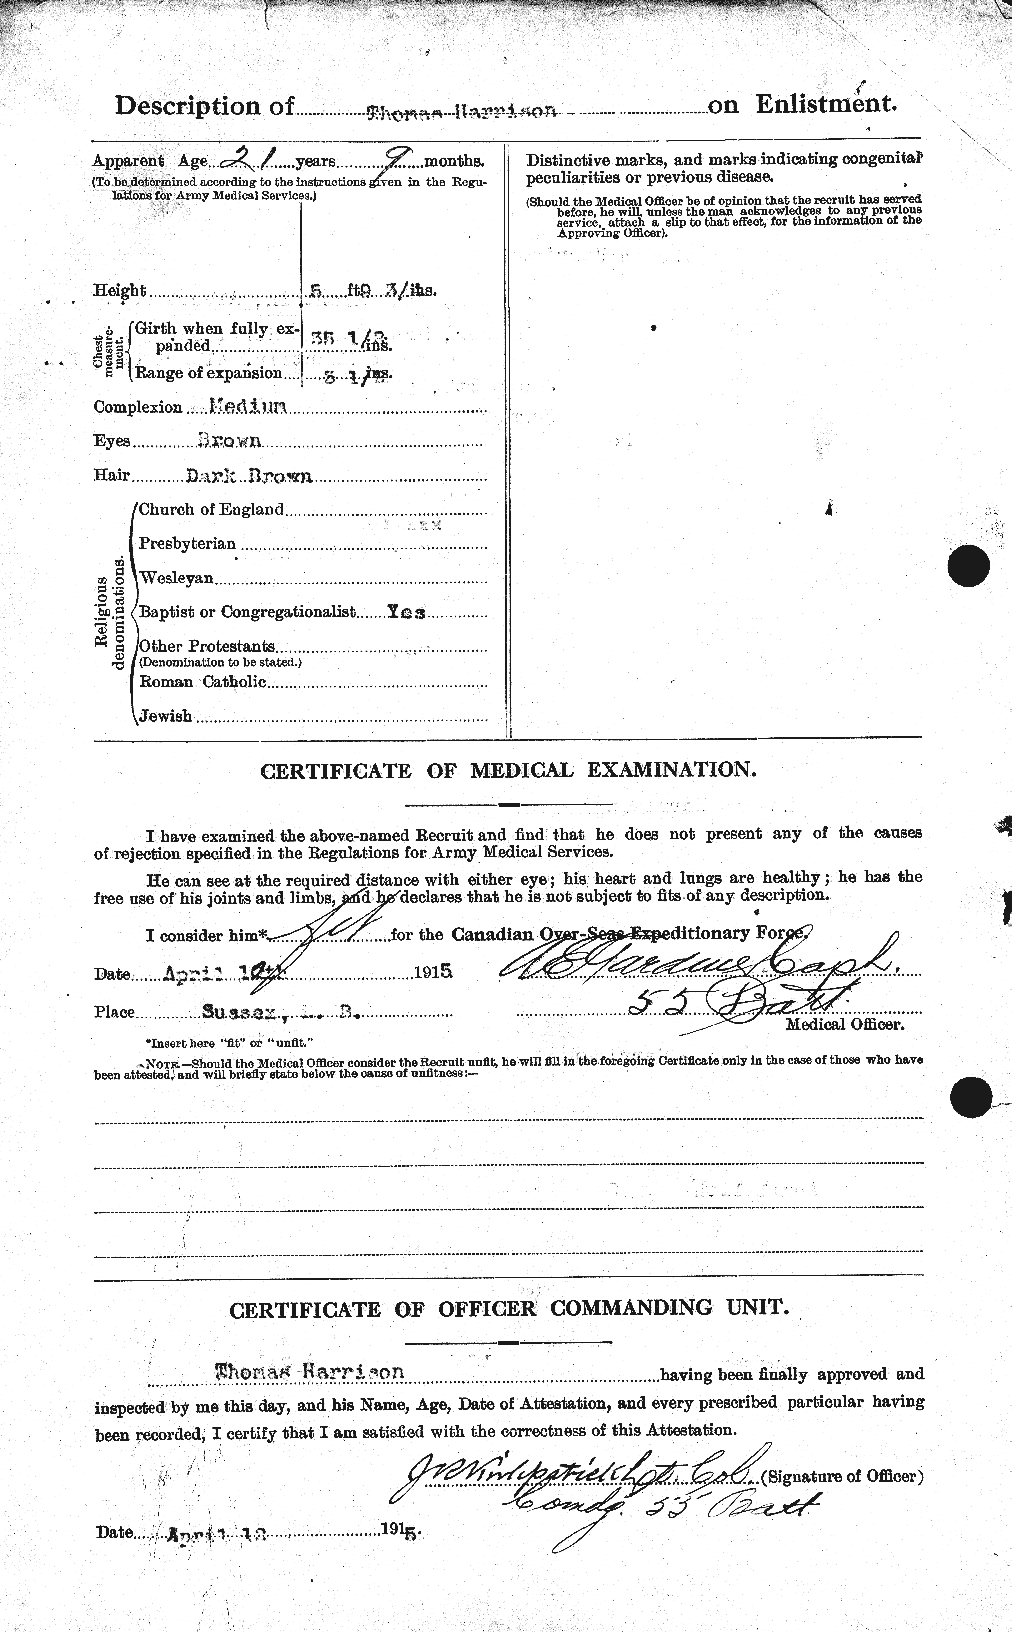 Personnel Records of the First World War - CEF 379877b